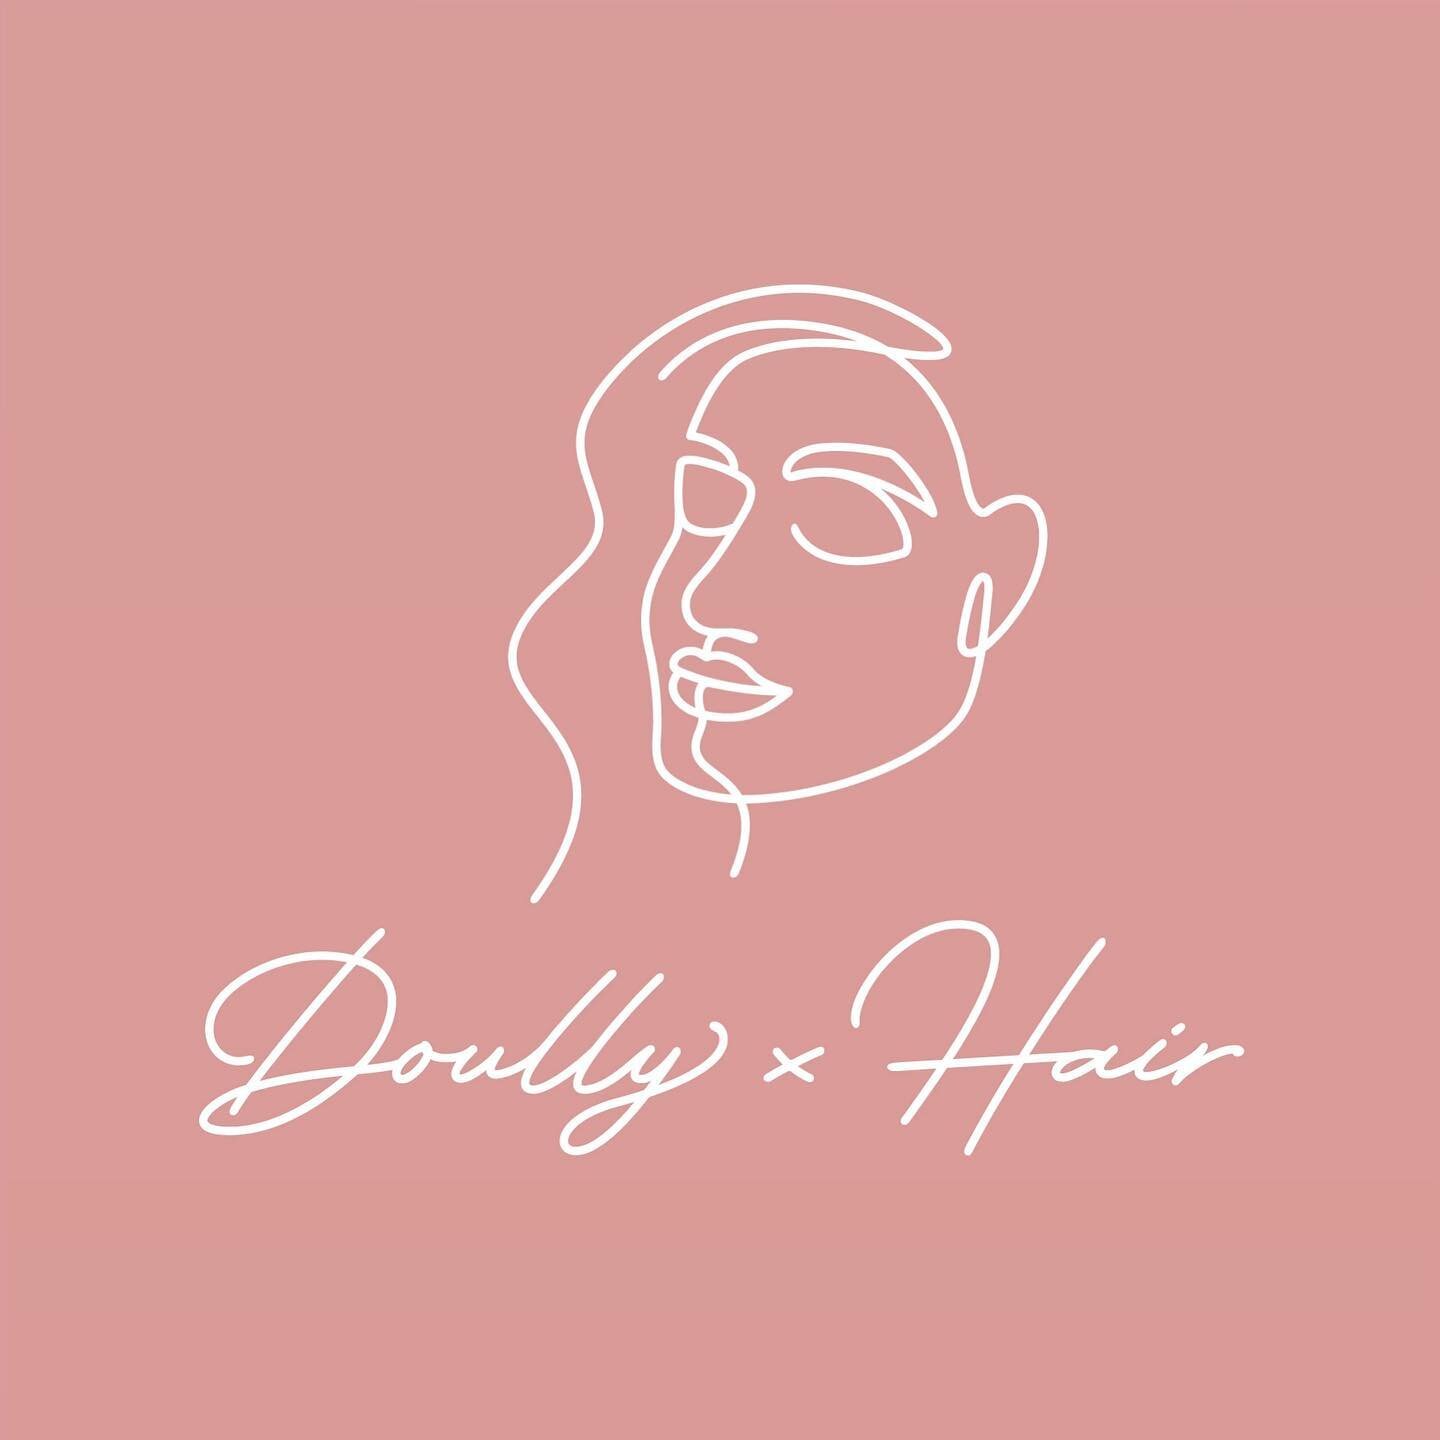 Had a blast making this beautiful minimalistic logo for our good friend Doully! Ladies looking for a master hairstylist/dope human to style your hair, book an appointment at @doullyxhair!